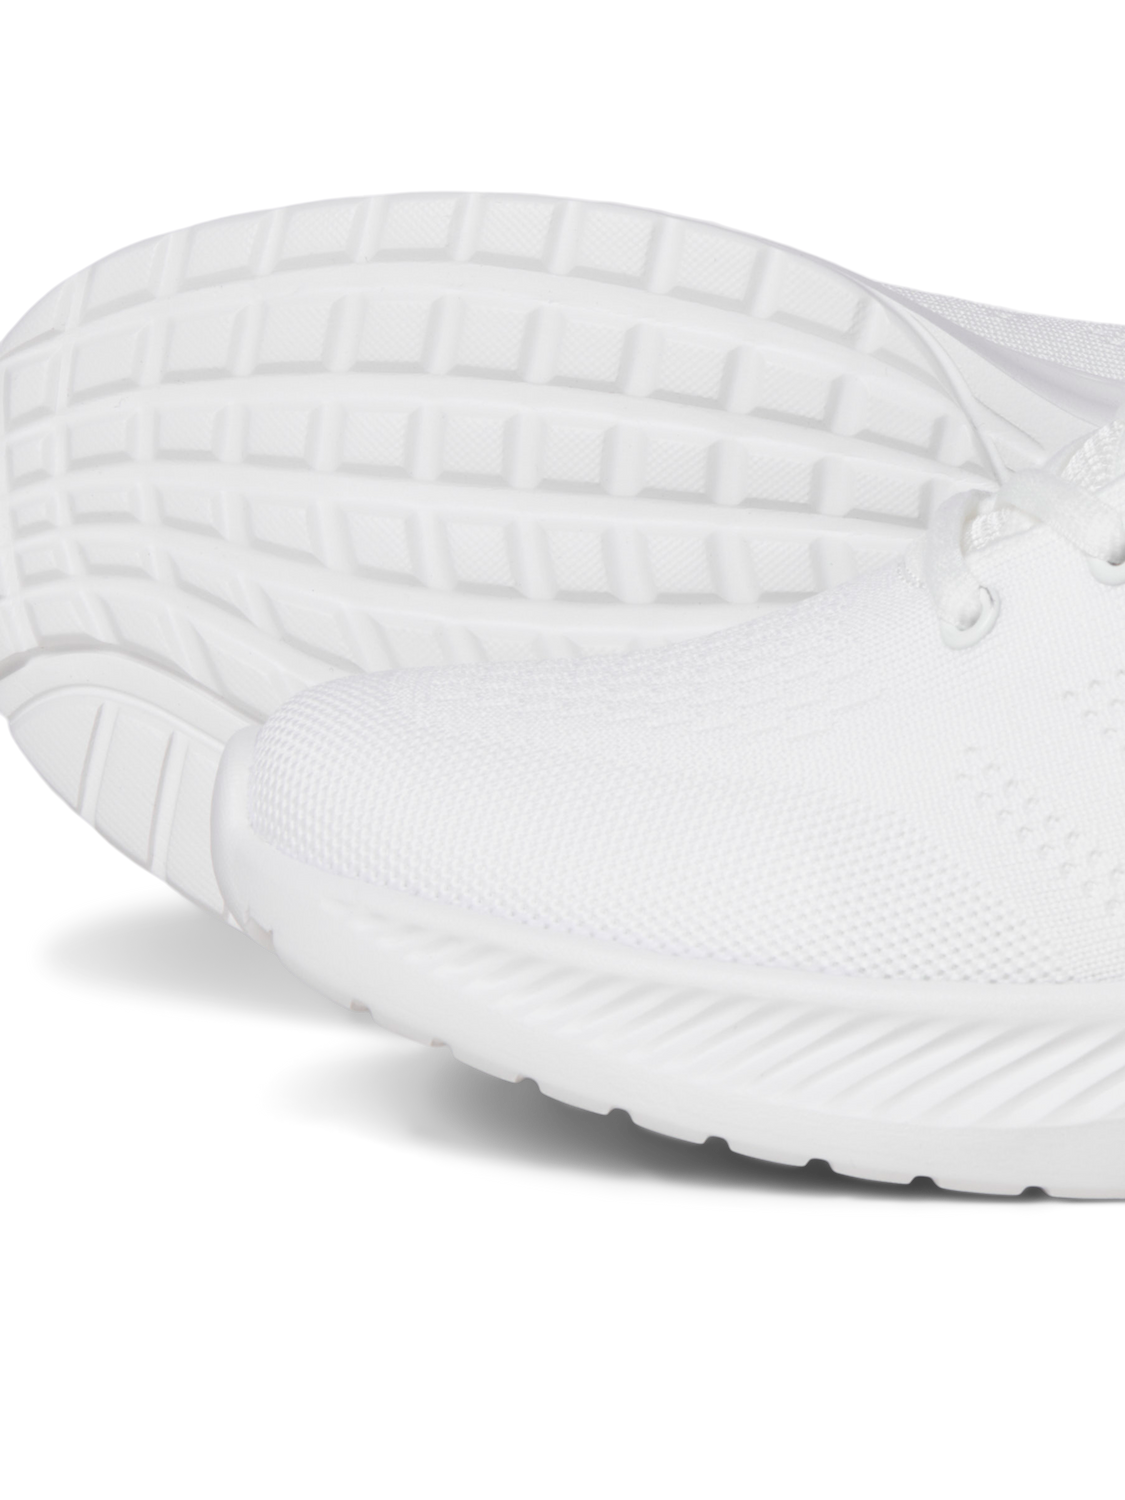 JFWCROXLEY Sneakers - Bright White